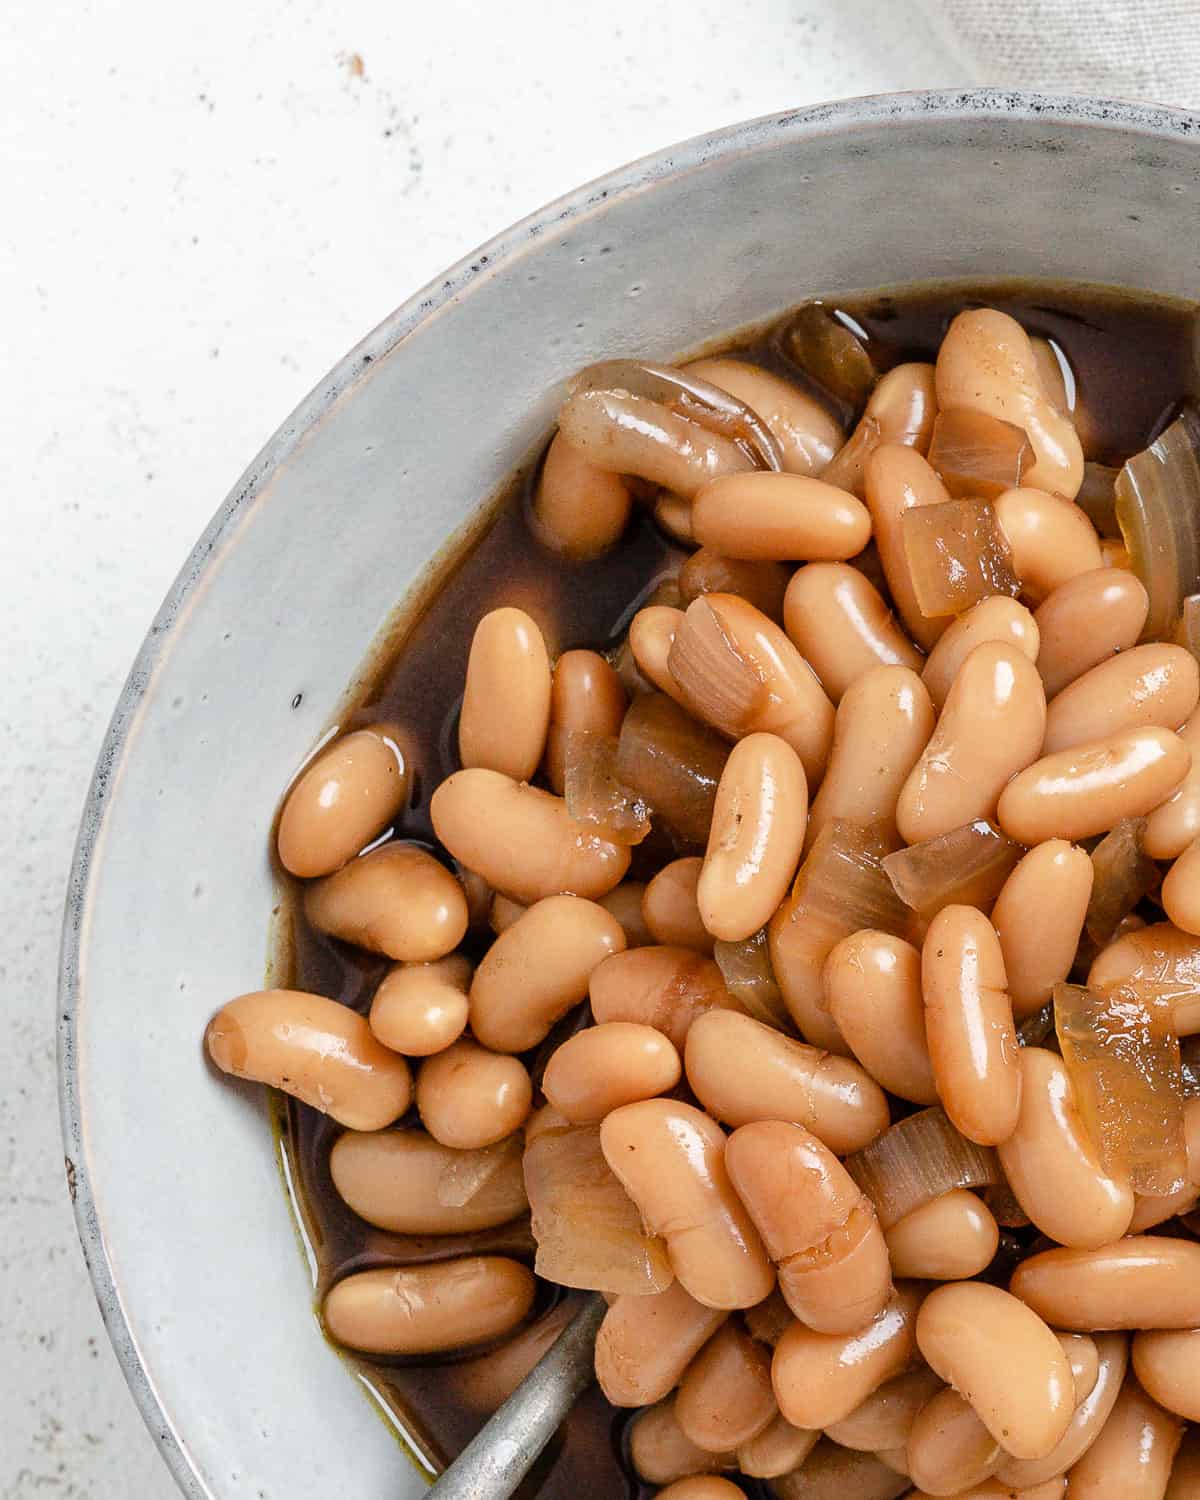 completed Vegan Slow Cooker Baked Beans in a white bowl against a white background